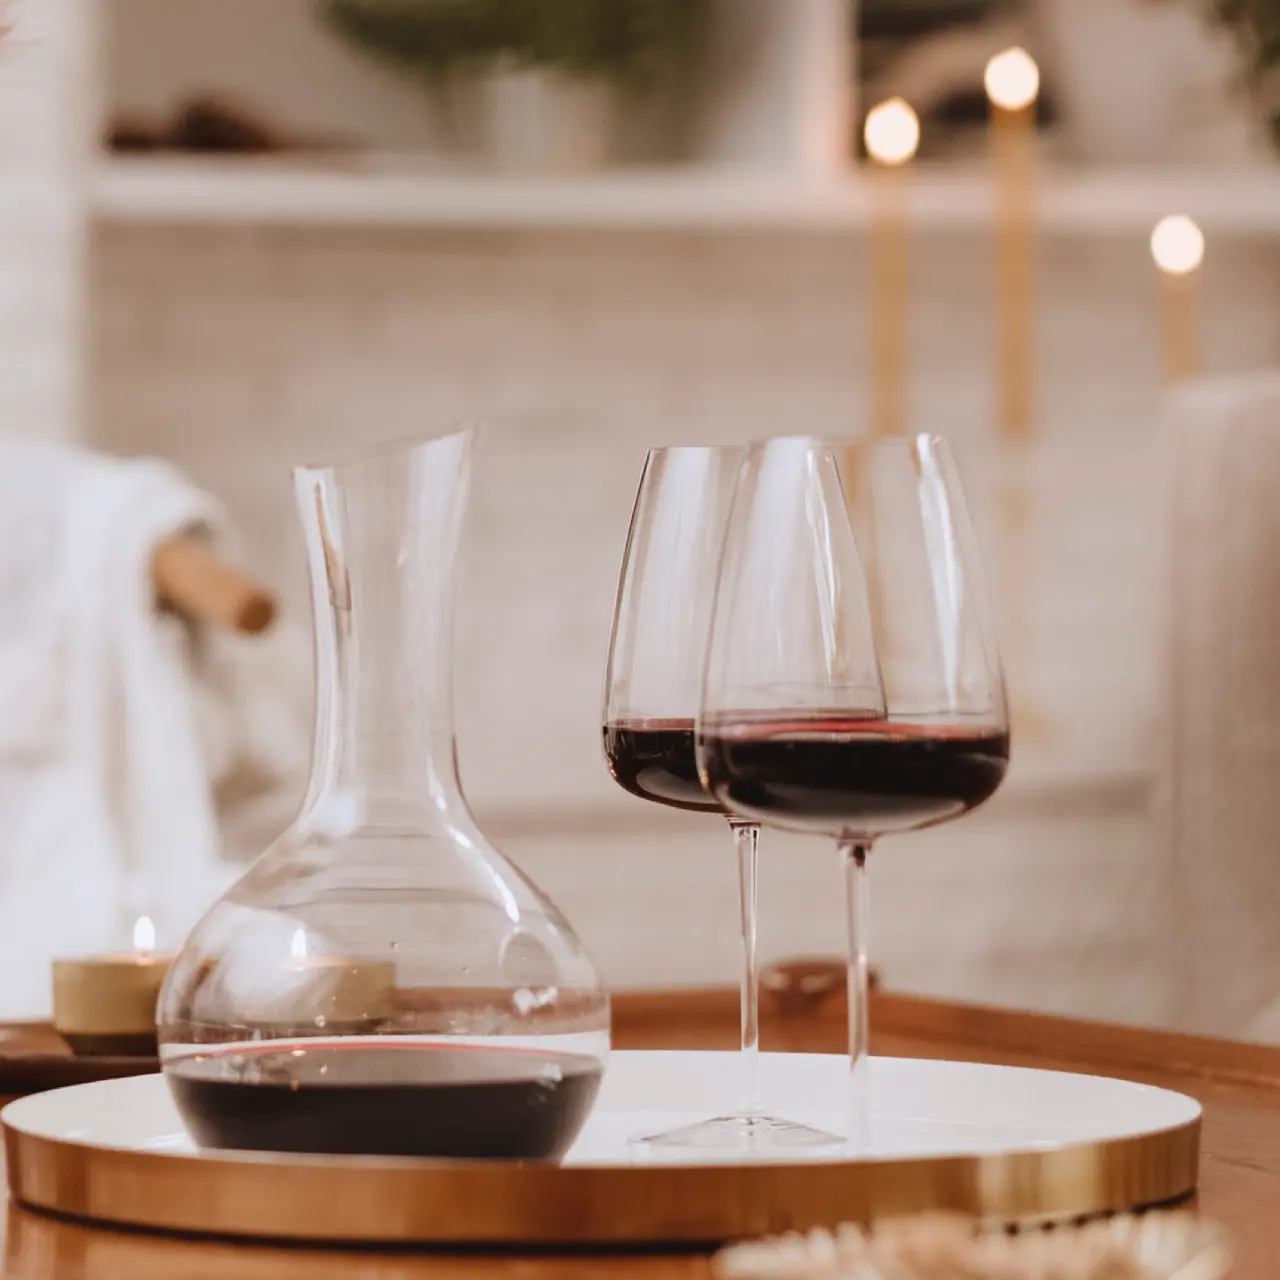 decanter with red wine glasses lifestyle image